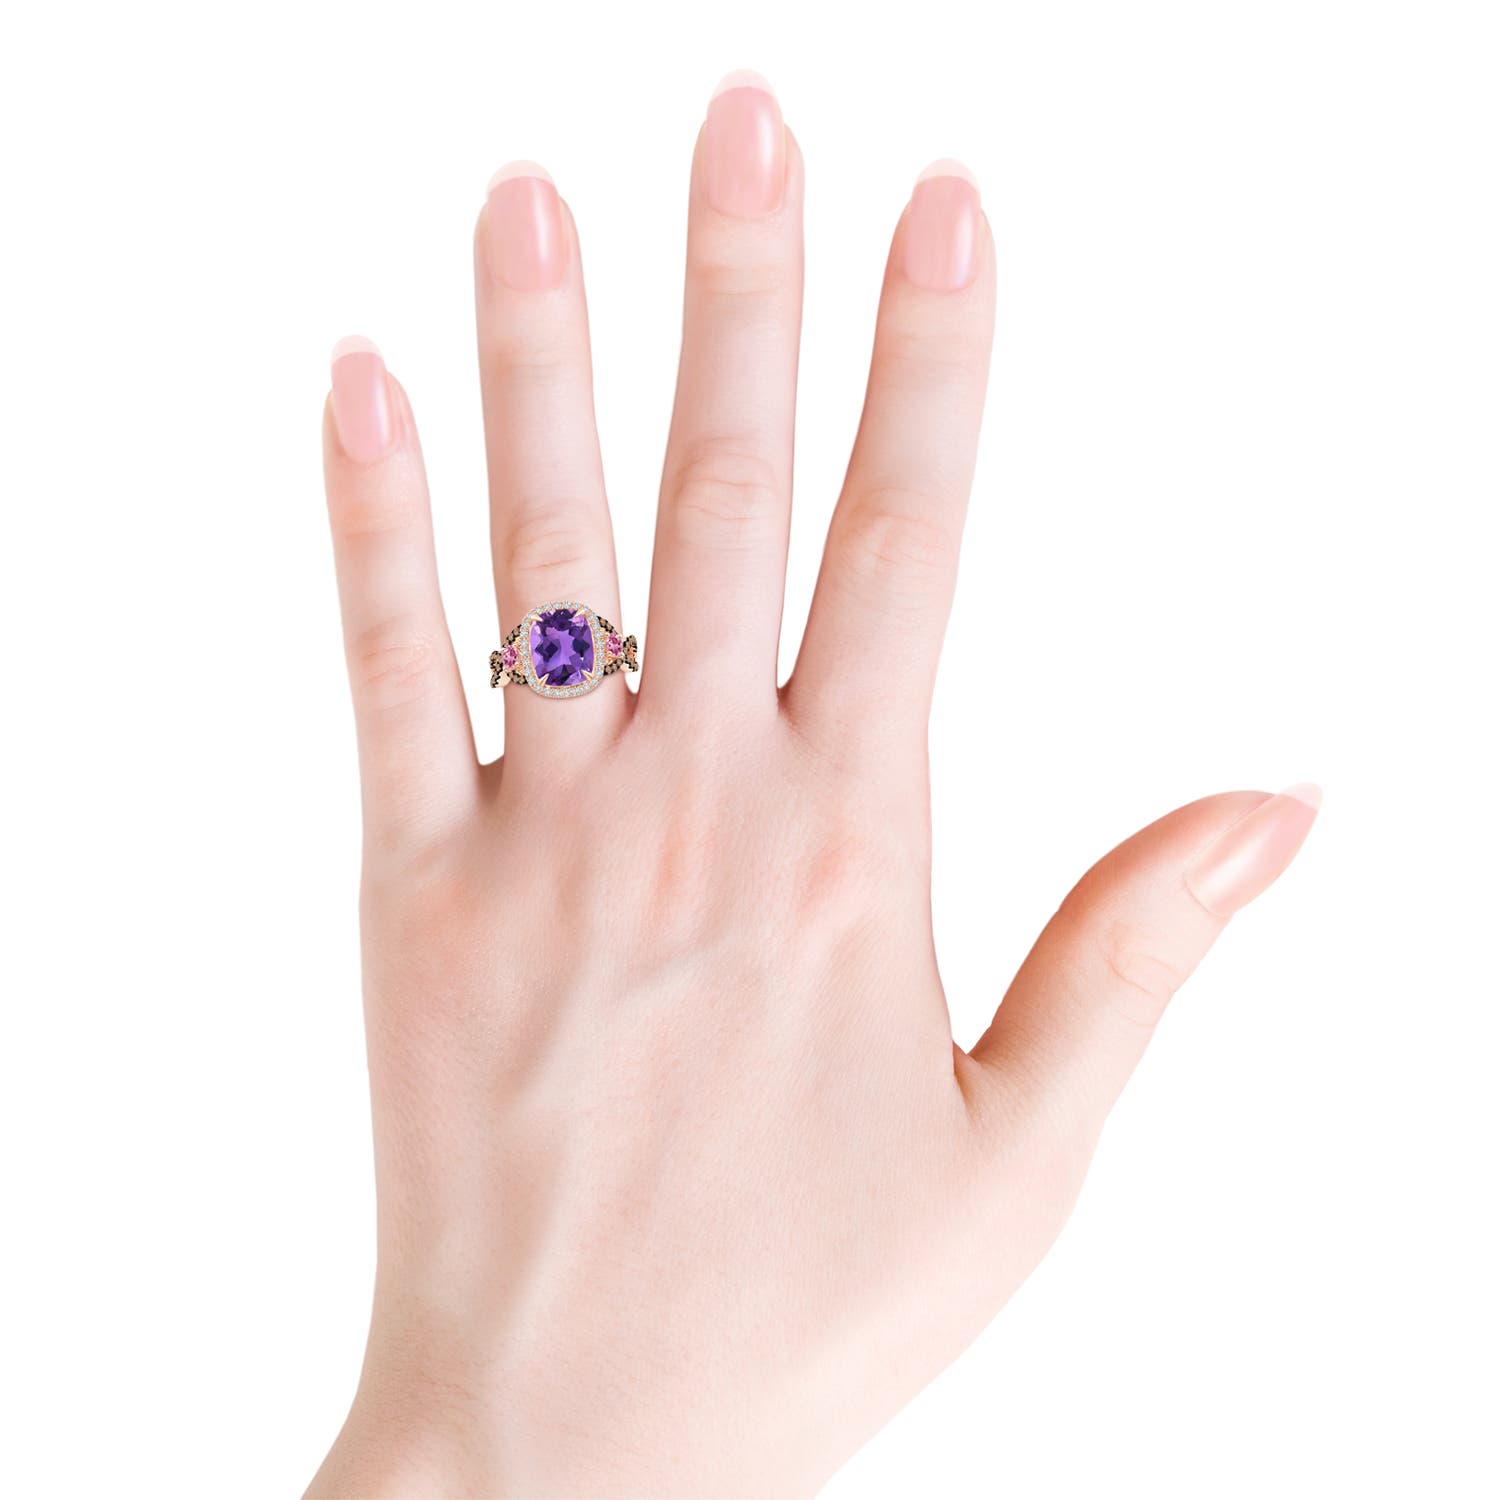 AAA - Amethyst / 3.39 CT / 14 KT Rose Gold